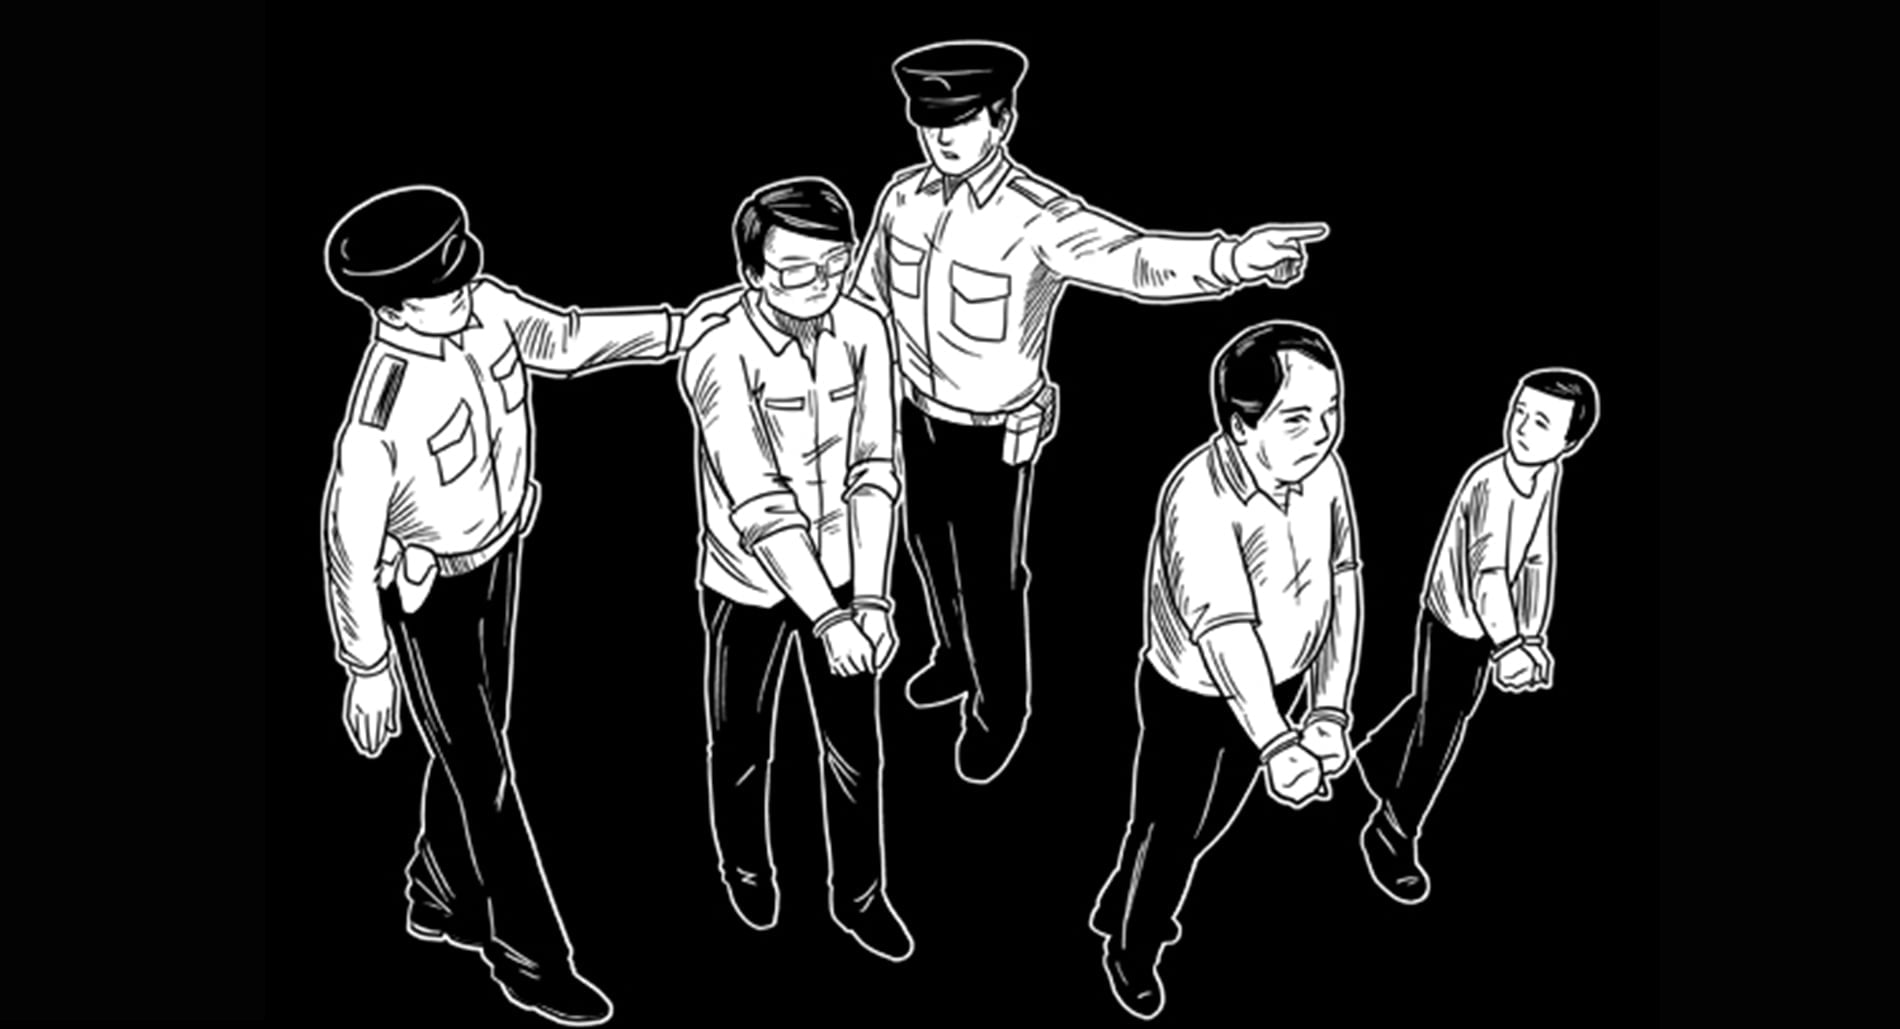 Illustration of Chinese police and prisoners of conscience